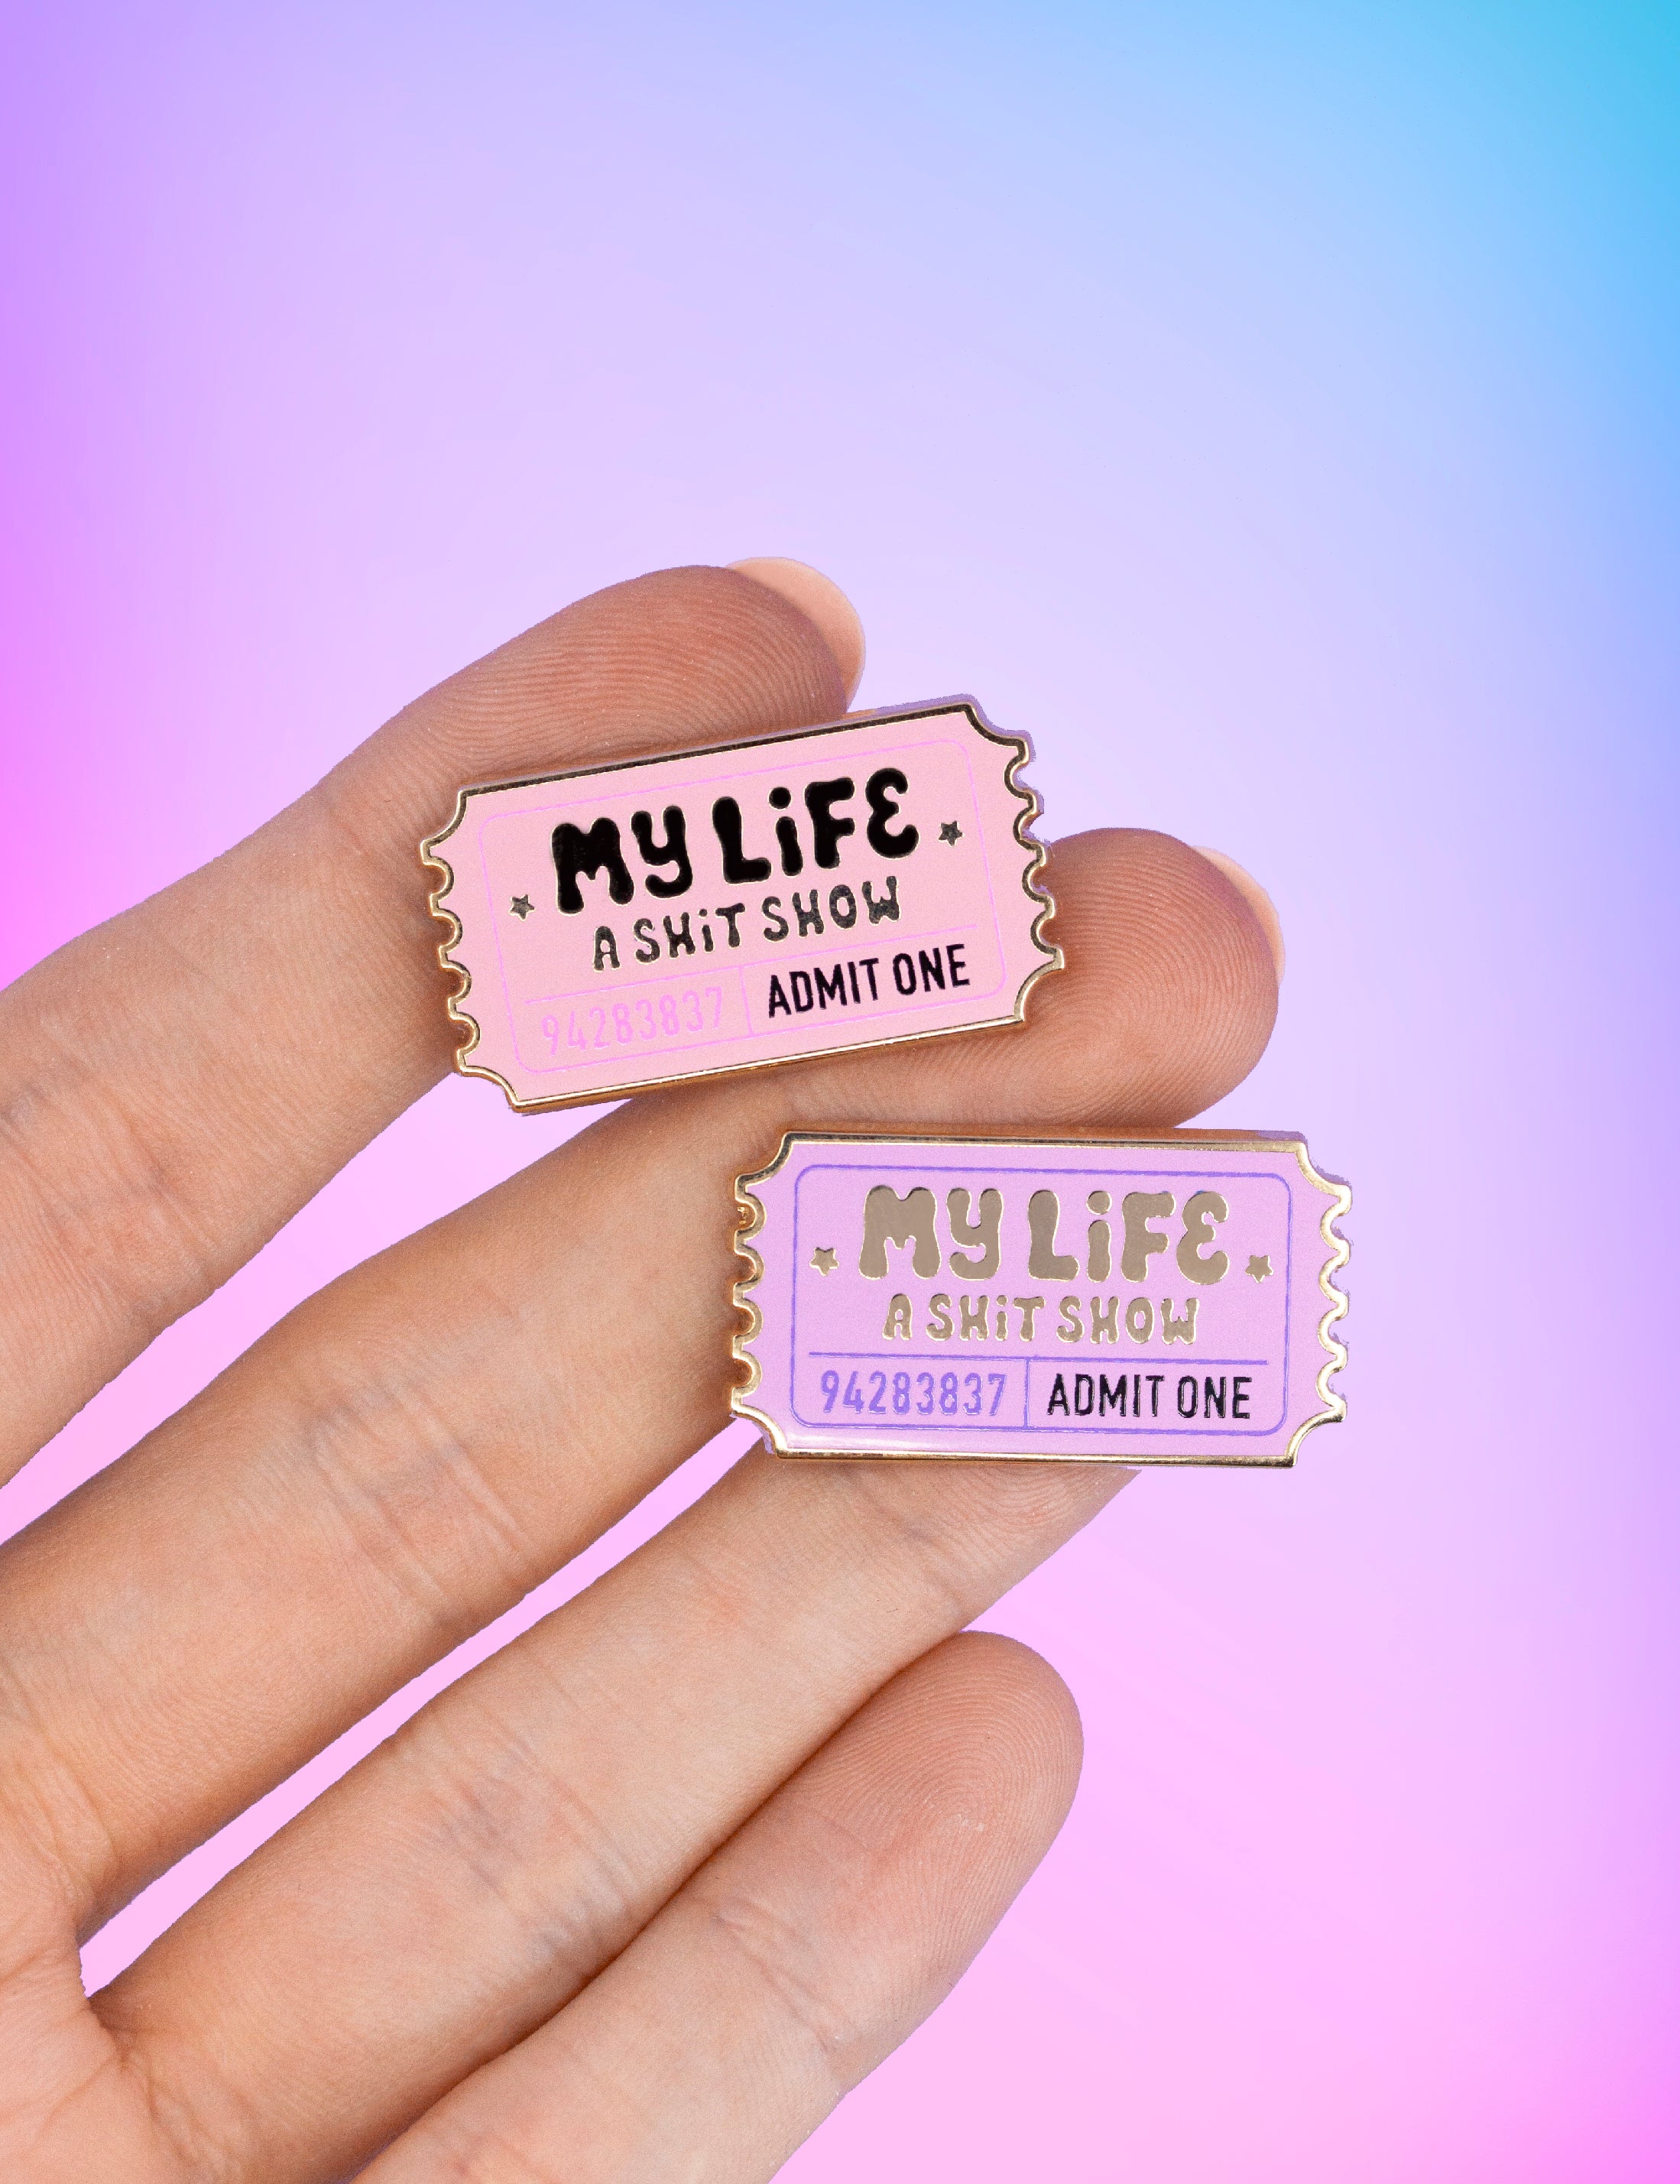 &quot;My life, a shit show&quot; ticket Pin